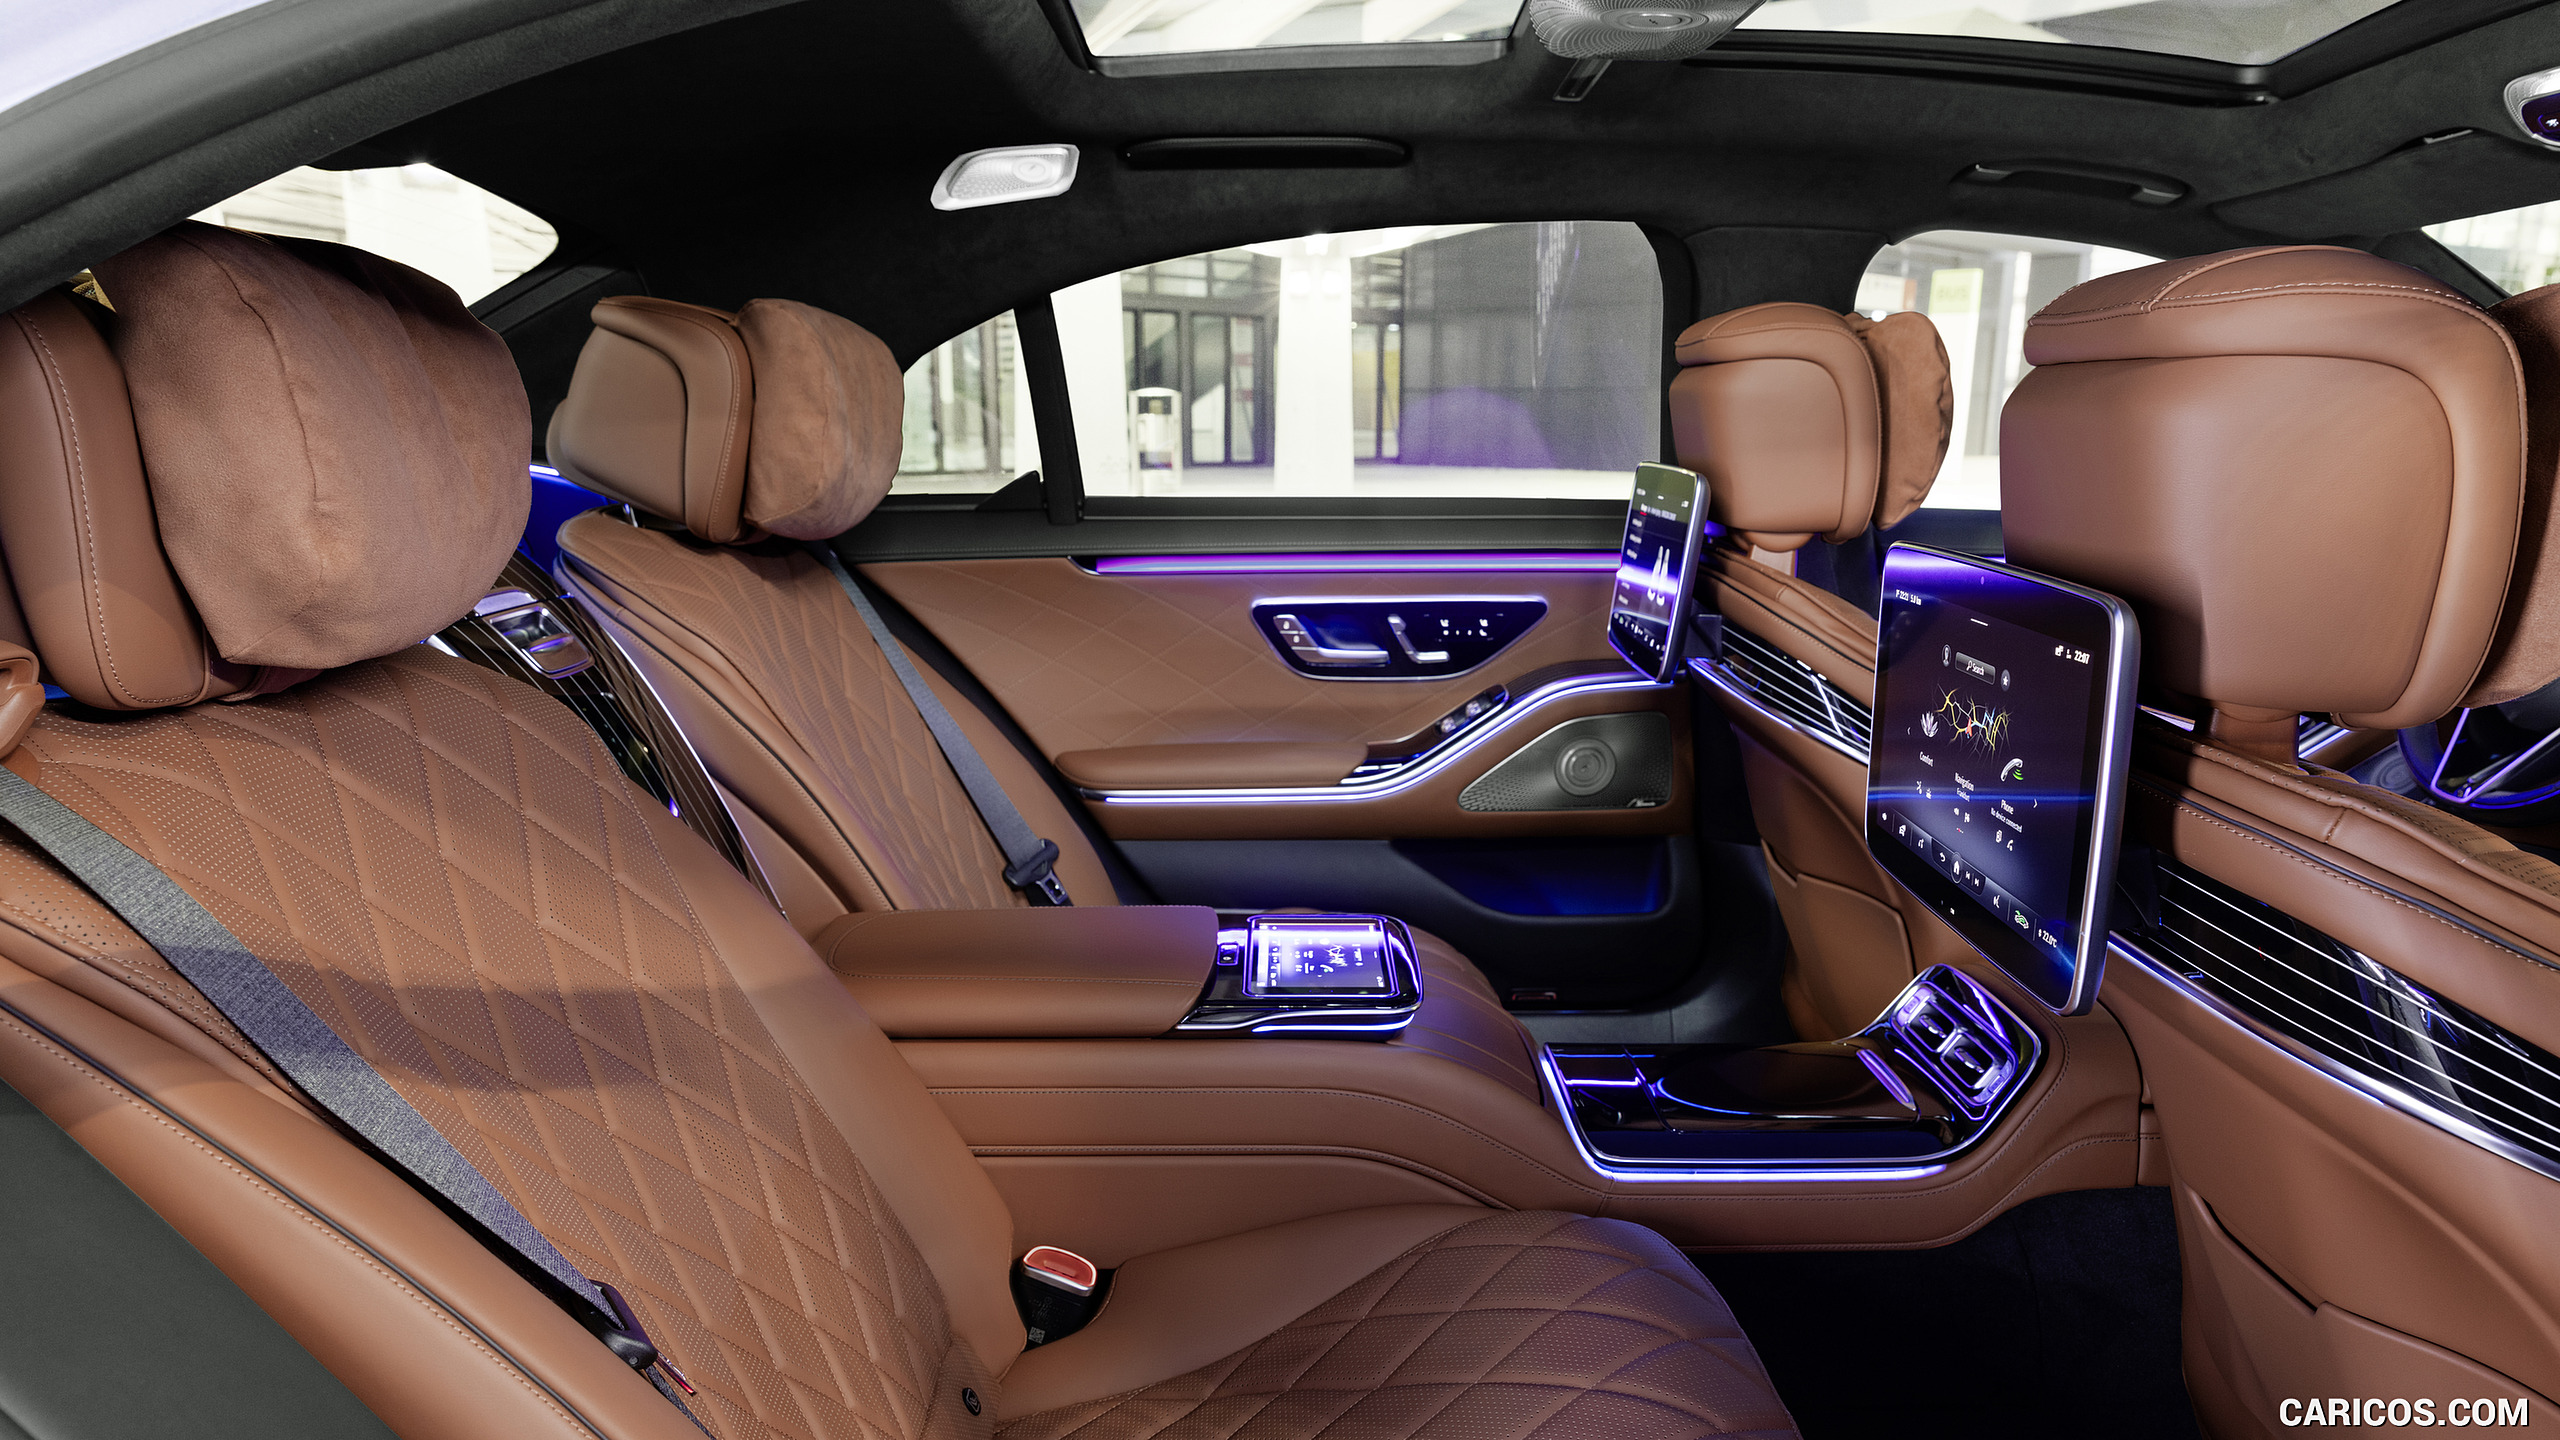 2021 Mercedes-Benz S-Class (Color: Leather Siena Brown) - Interior, Rear Seats, #138 of 316